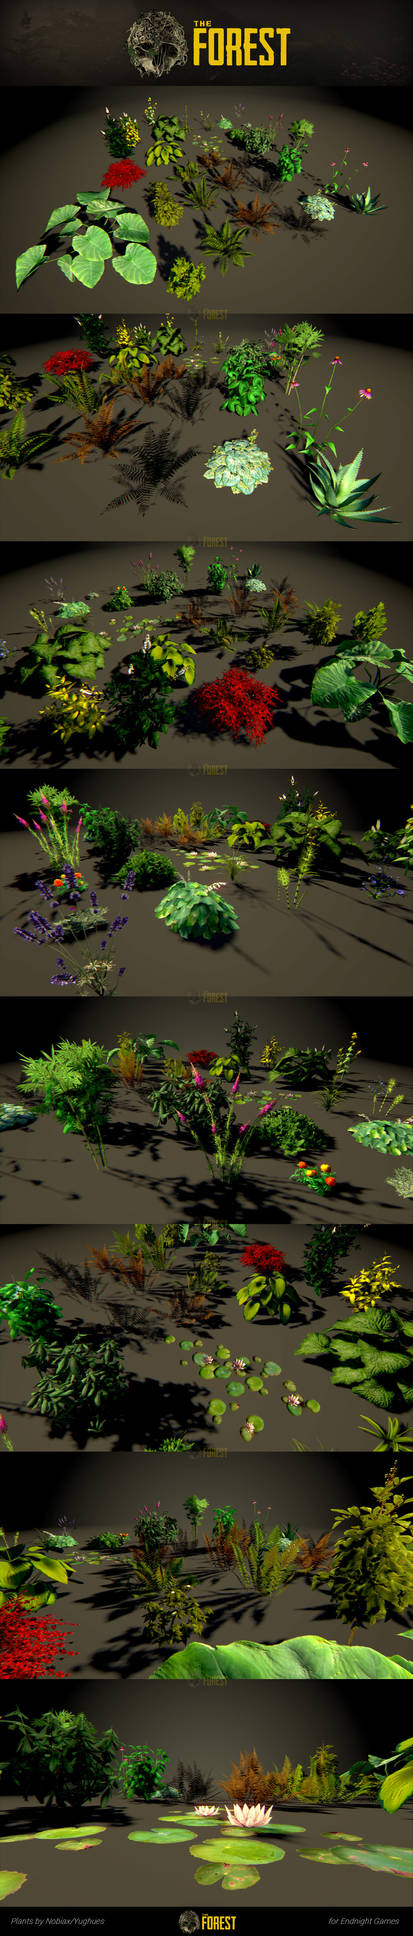 The Forest : plants showcase